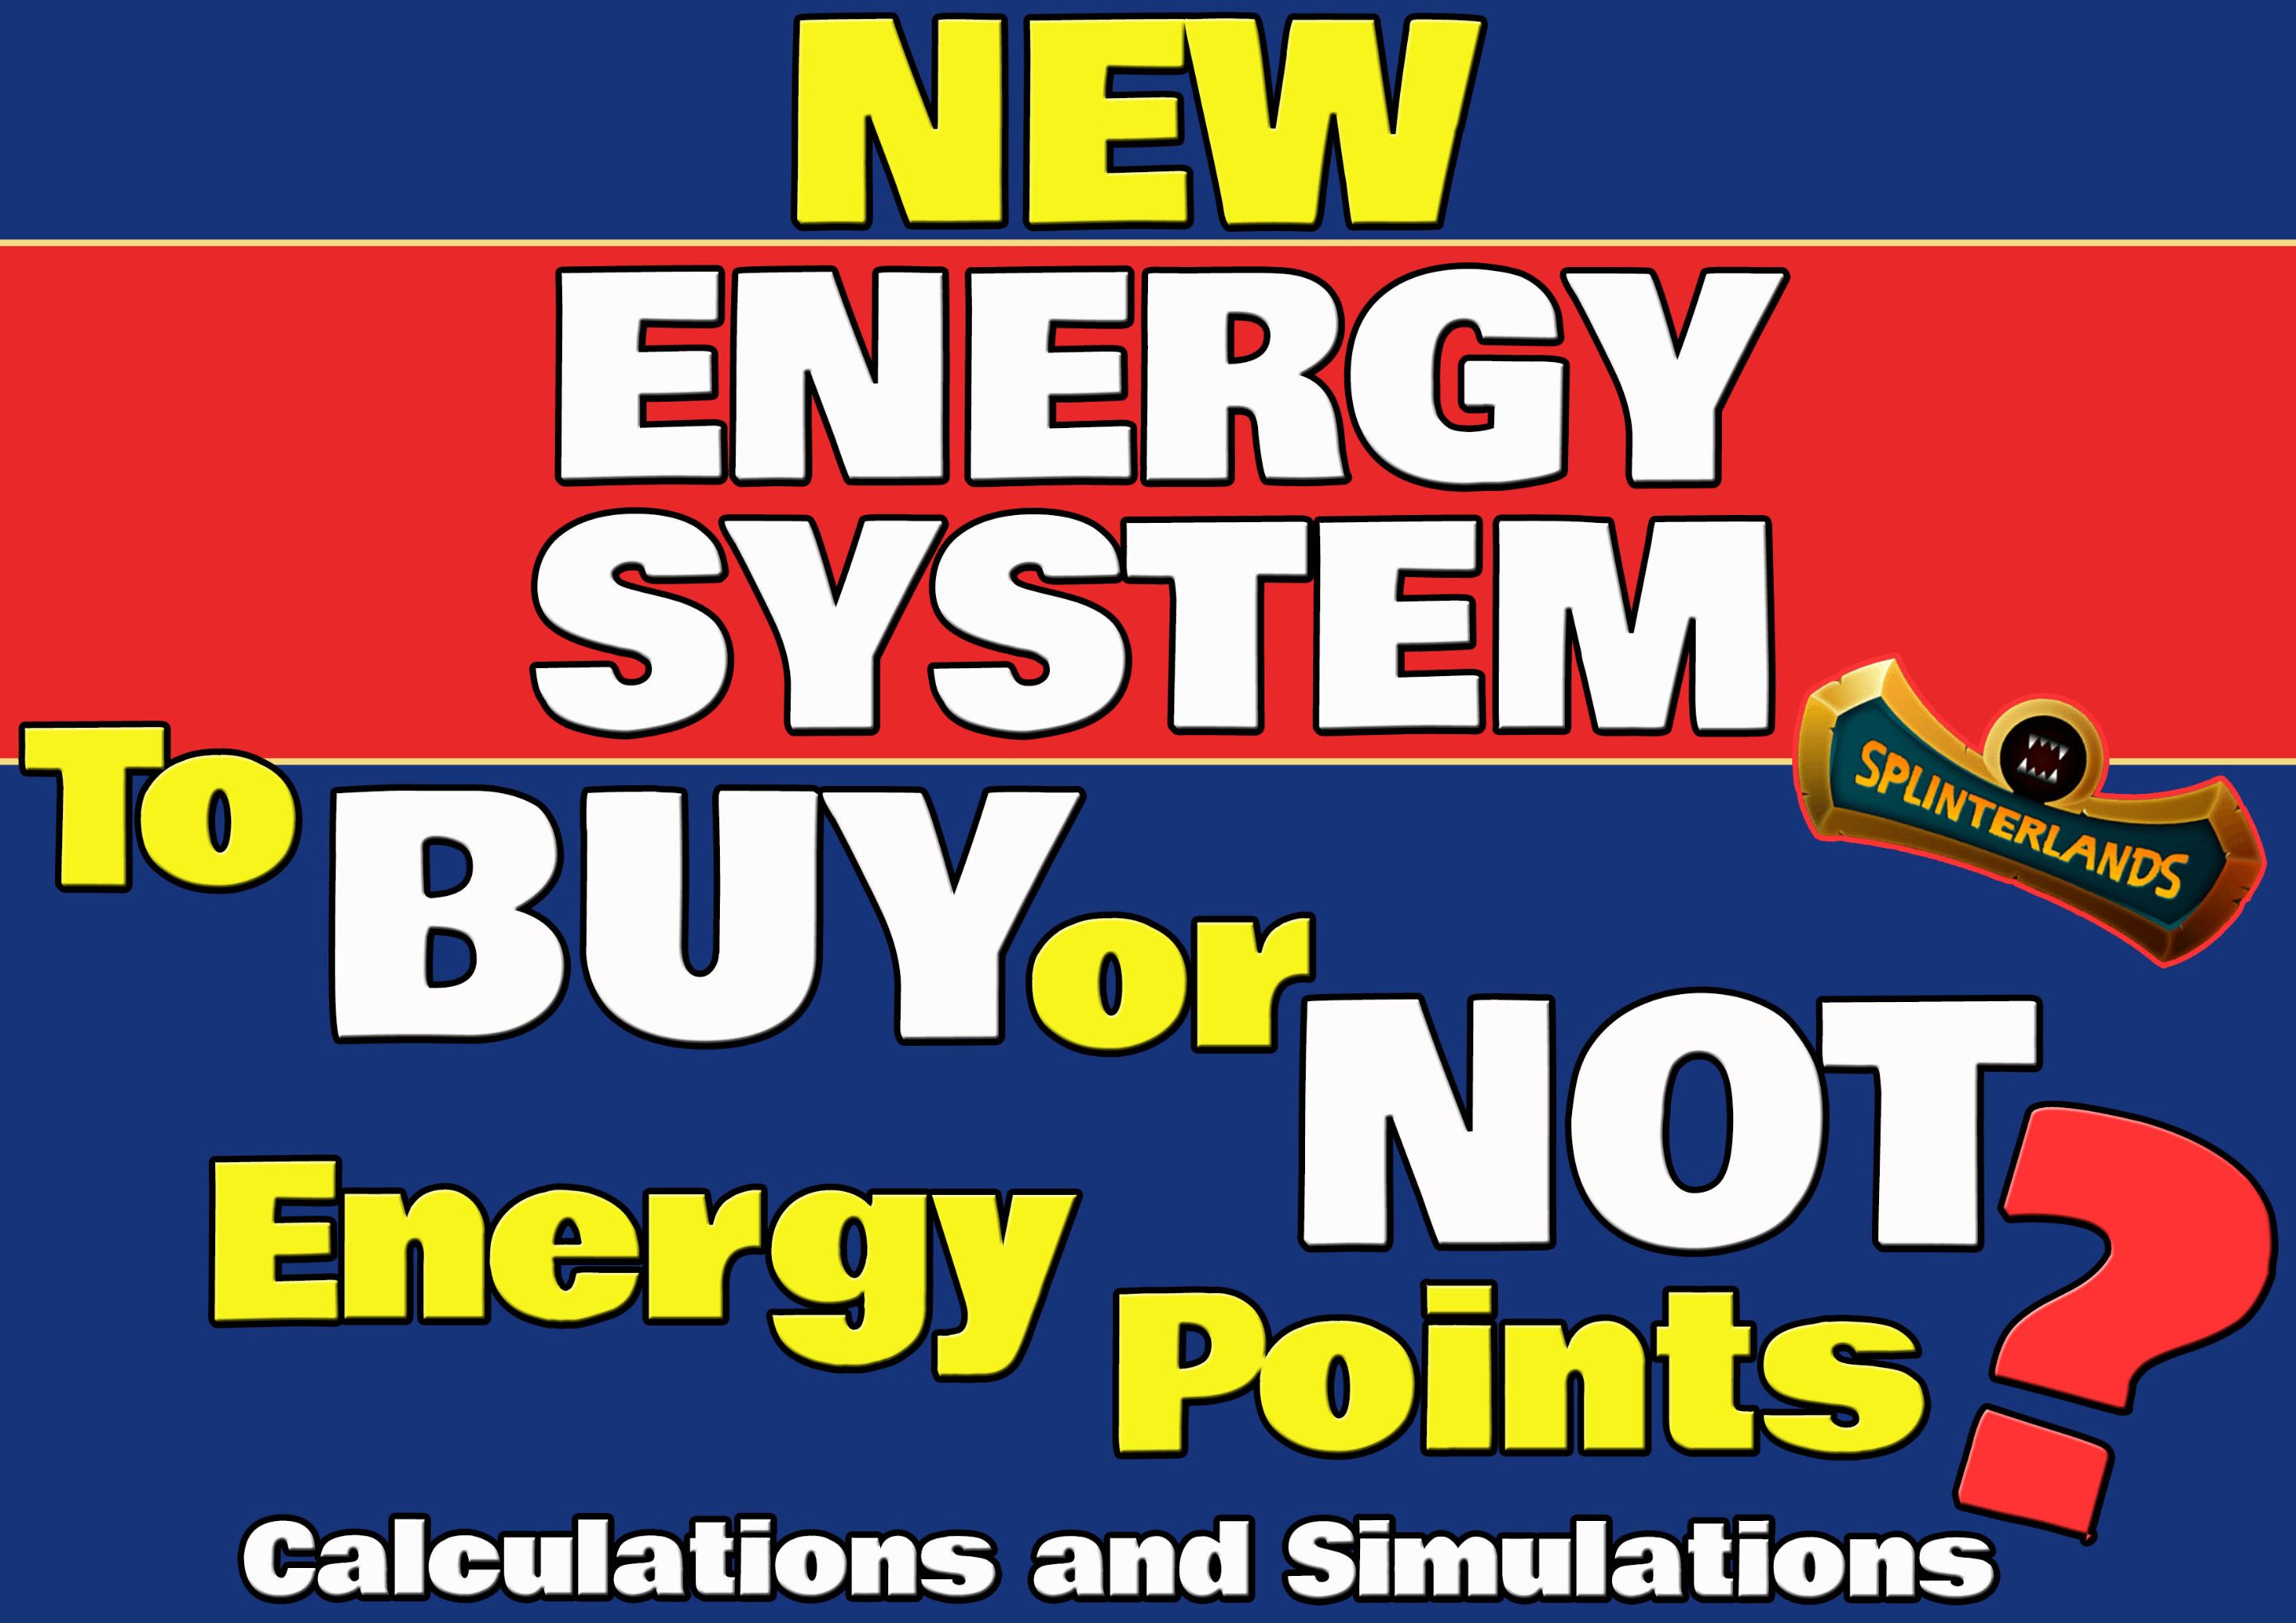 @libertycrypto27/new-energy-system-to-buy-or-not-buy-the-energy-points-calculations-simulations-and-considerations-engita